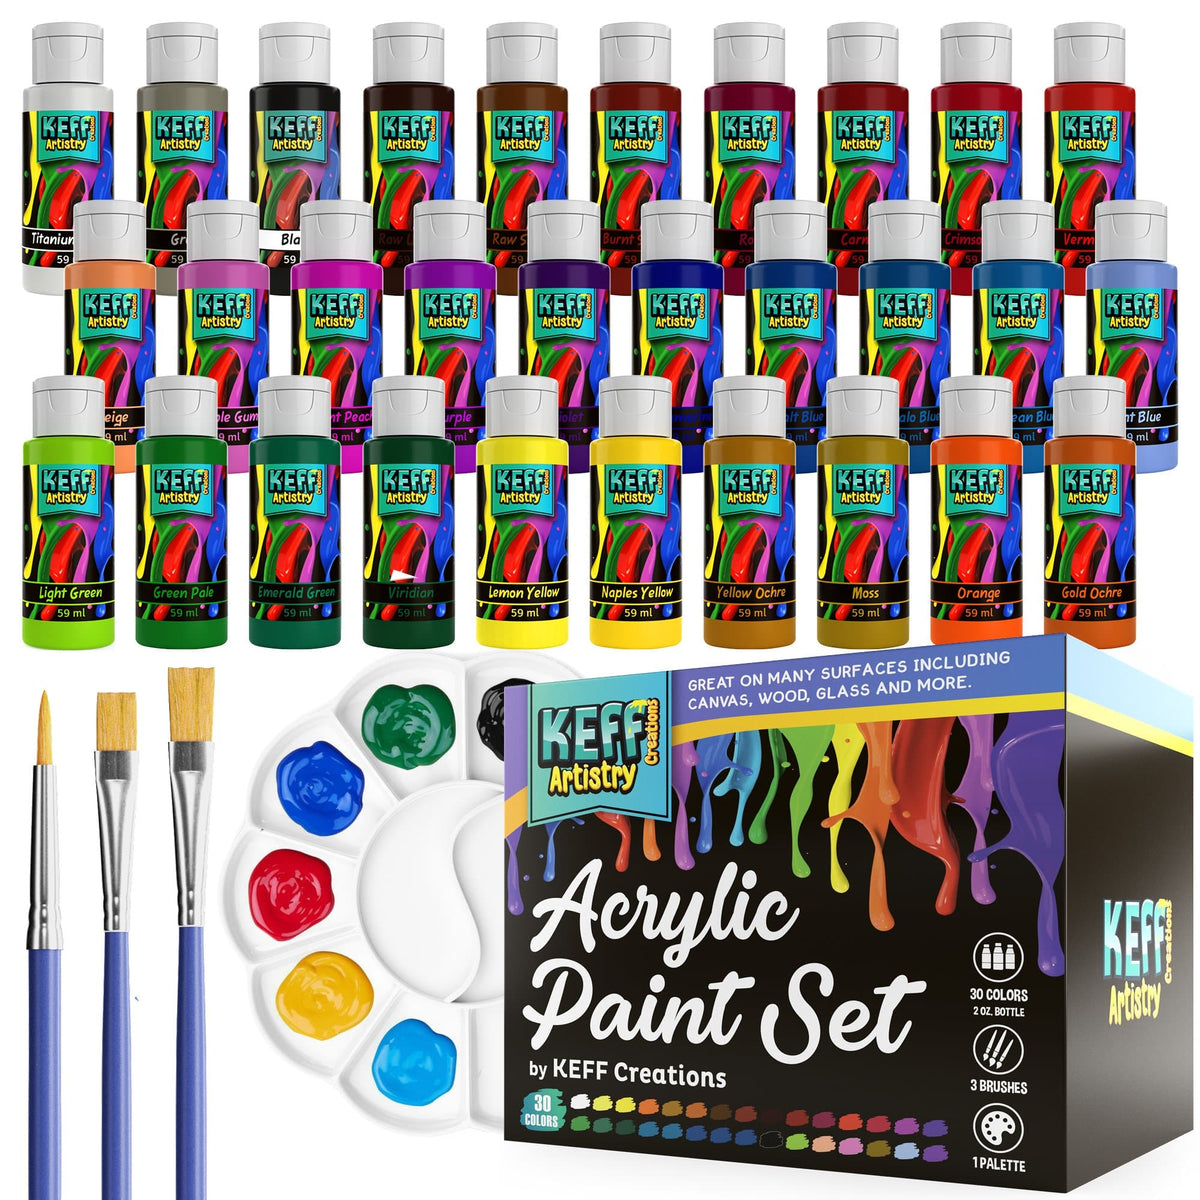  KEFF Kids Painting Set - Acrylic Paint Set for Kids, 32 Piece  Non-Toxic Painting Supplies, Art Supplies Kit with Pre Drawn Canvases,  Wooden Easel, Paint Brushes, Beginner Kids Paint Set 